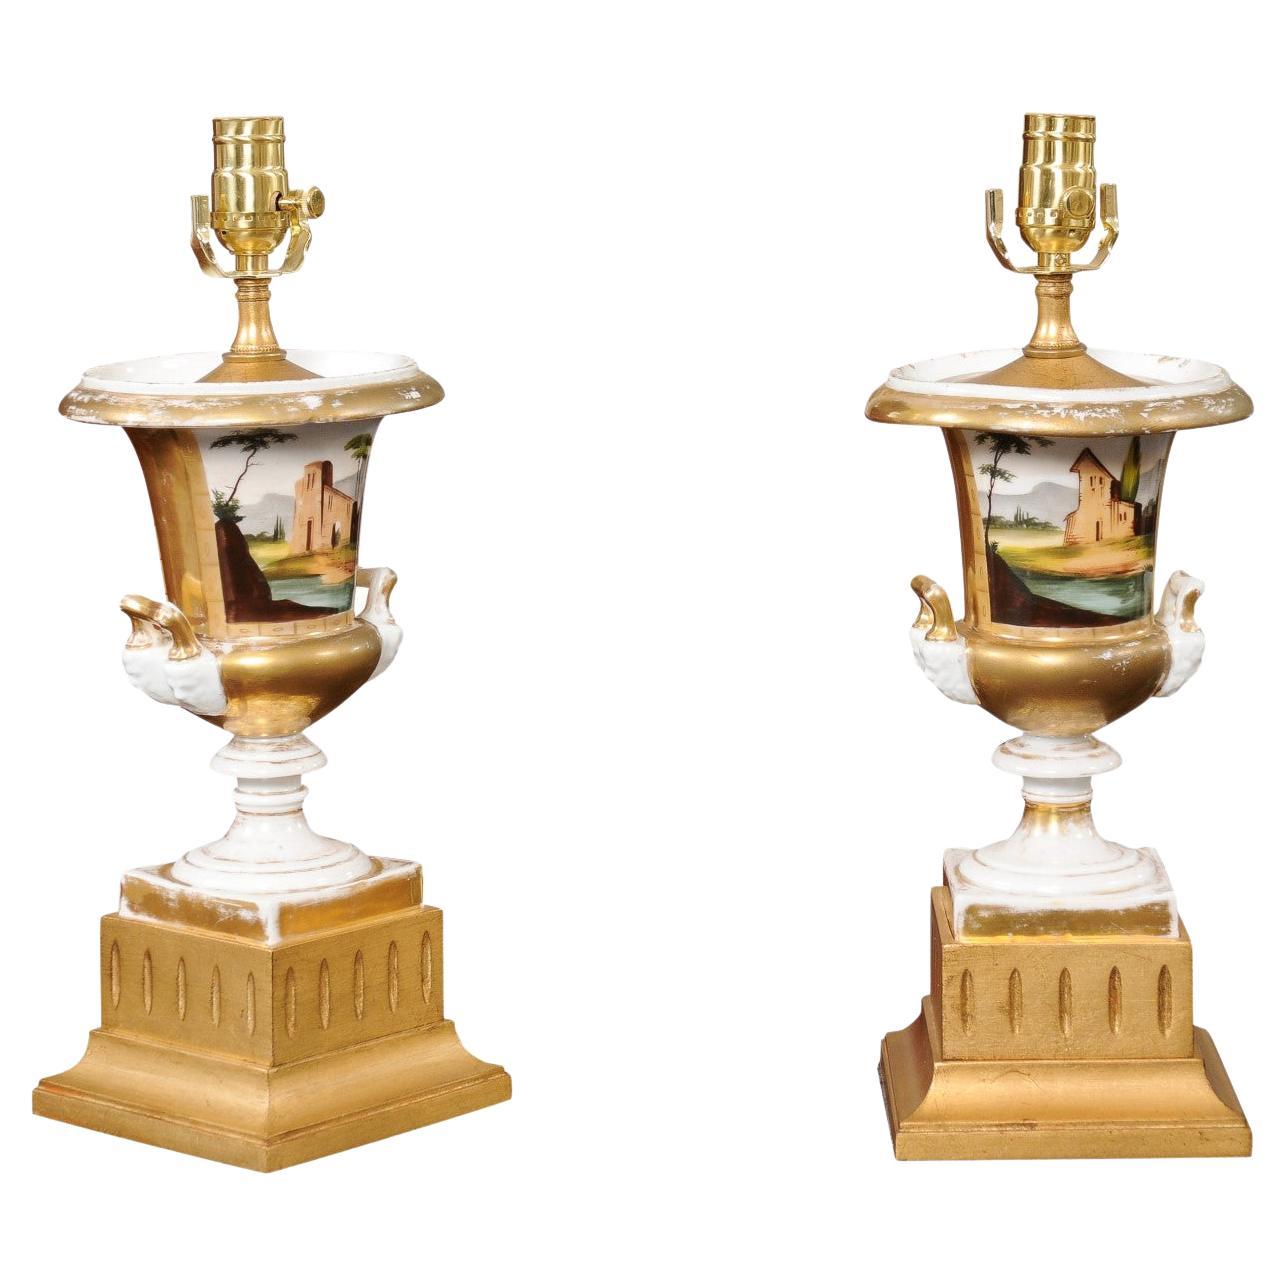  Pair of 19th Century Paris Porcelain Urns, wired as Lamps For Sale